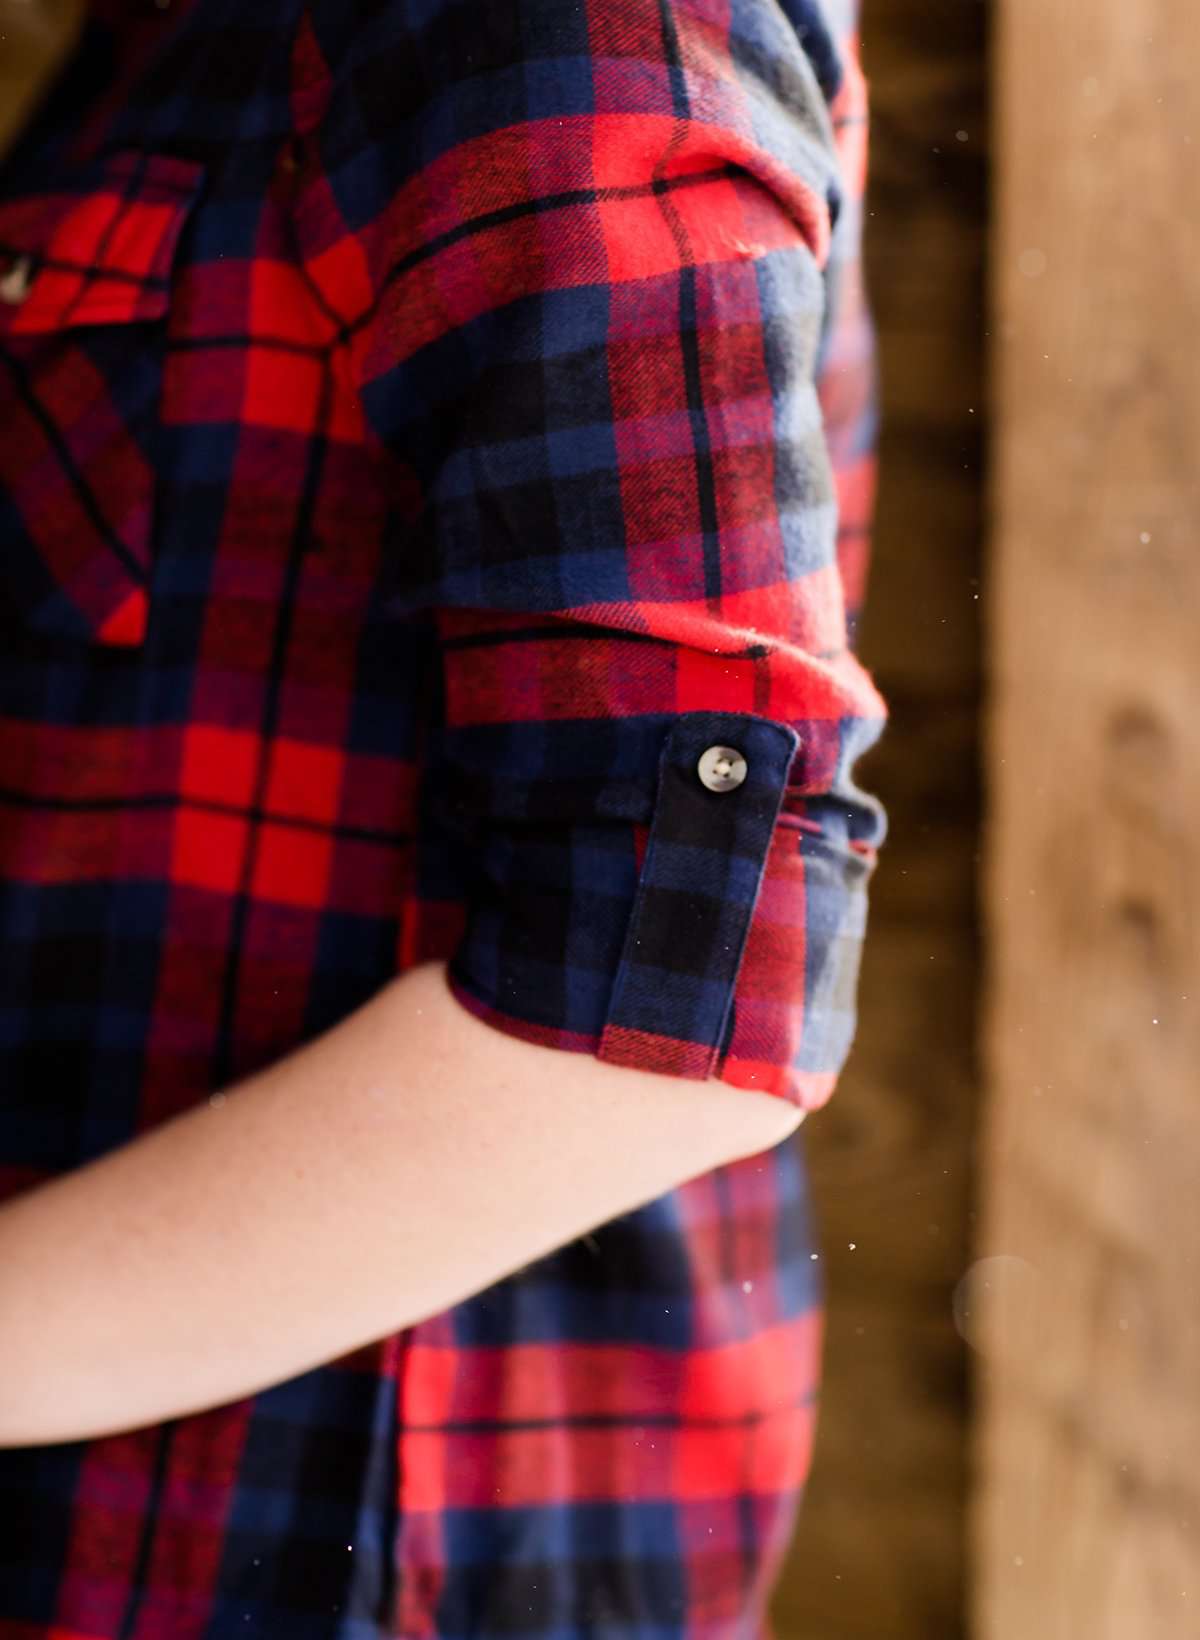 Woman wearing a cozy, checkered plaid top. This button up plaid shirt features roll tab sleeves and is black, navy and red. It is also paired with a below the knee jean skirt.